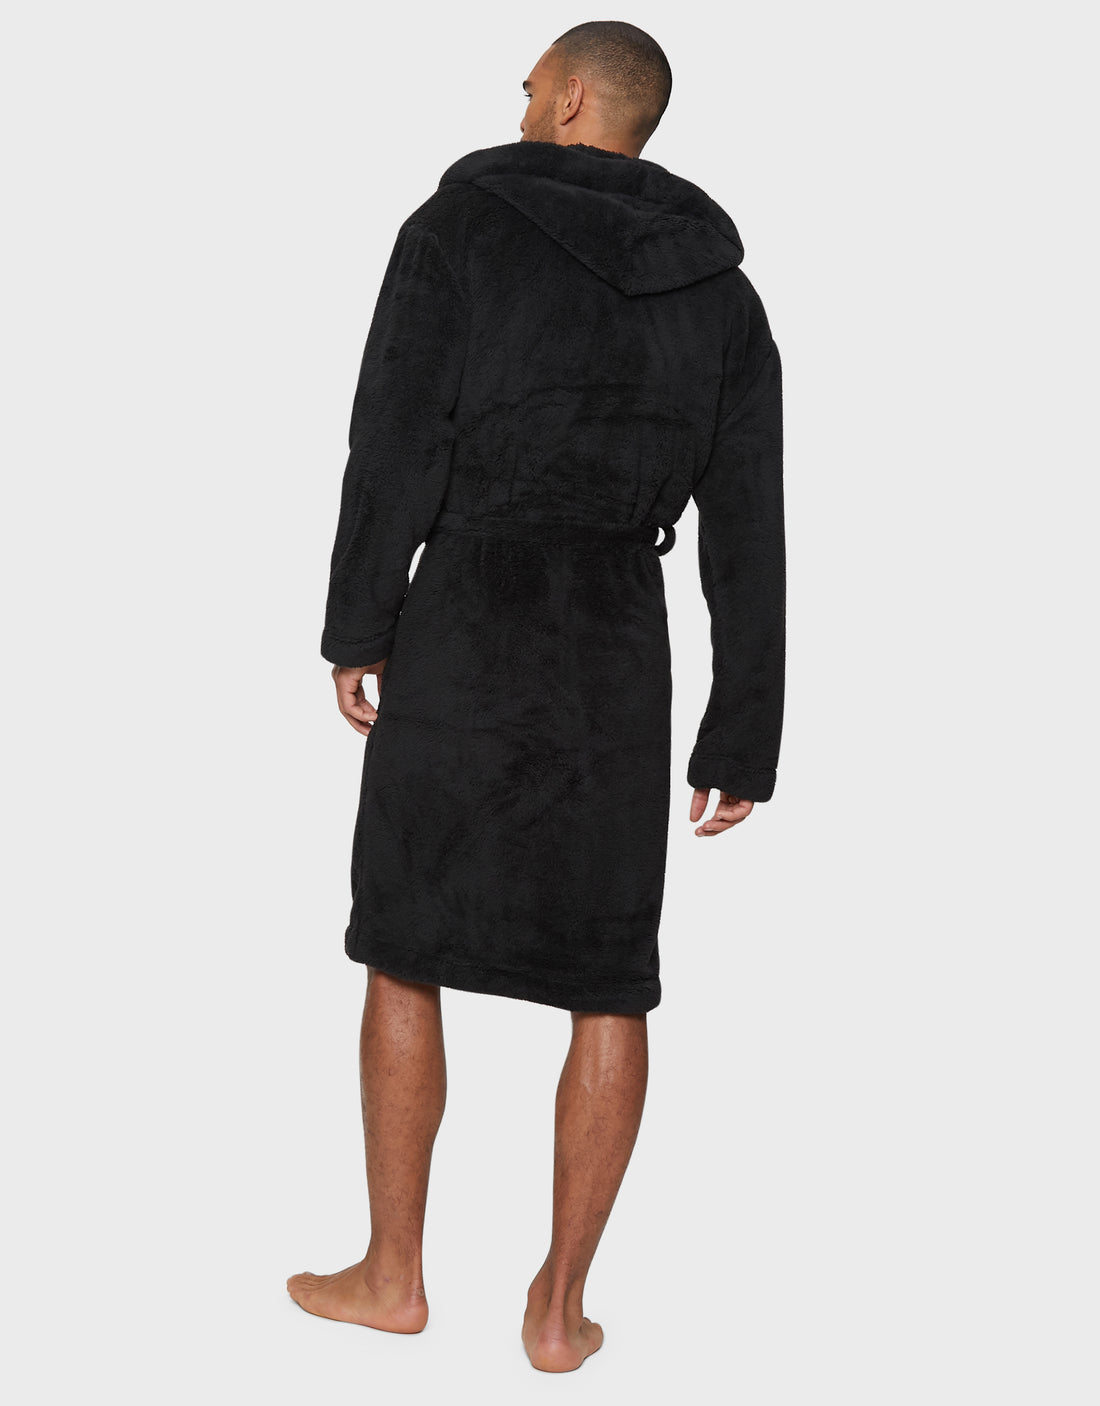 Buy Arus Men's Hooded Classic Bathrobe Turkish Cotton Robe with Full Length  Options, Black, Small-Medium Online at Low Prices in India - Amazon.in